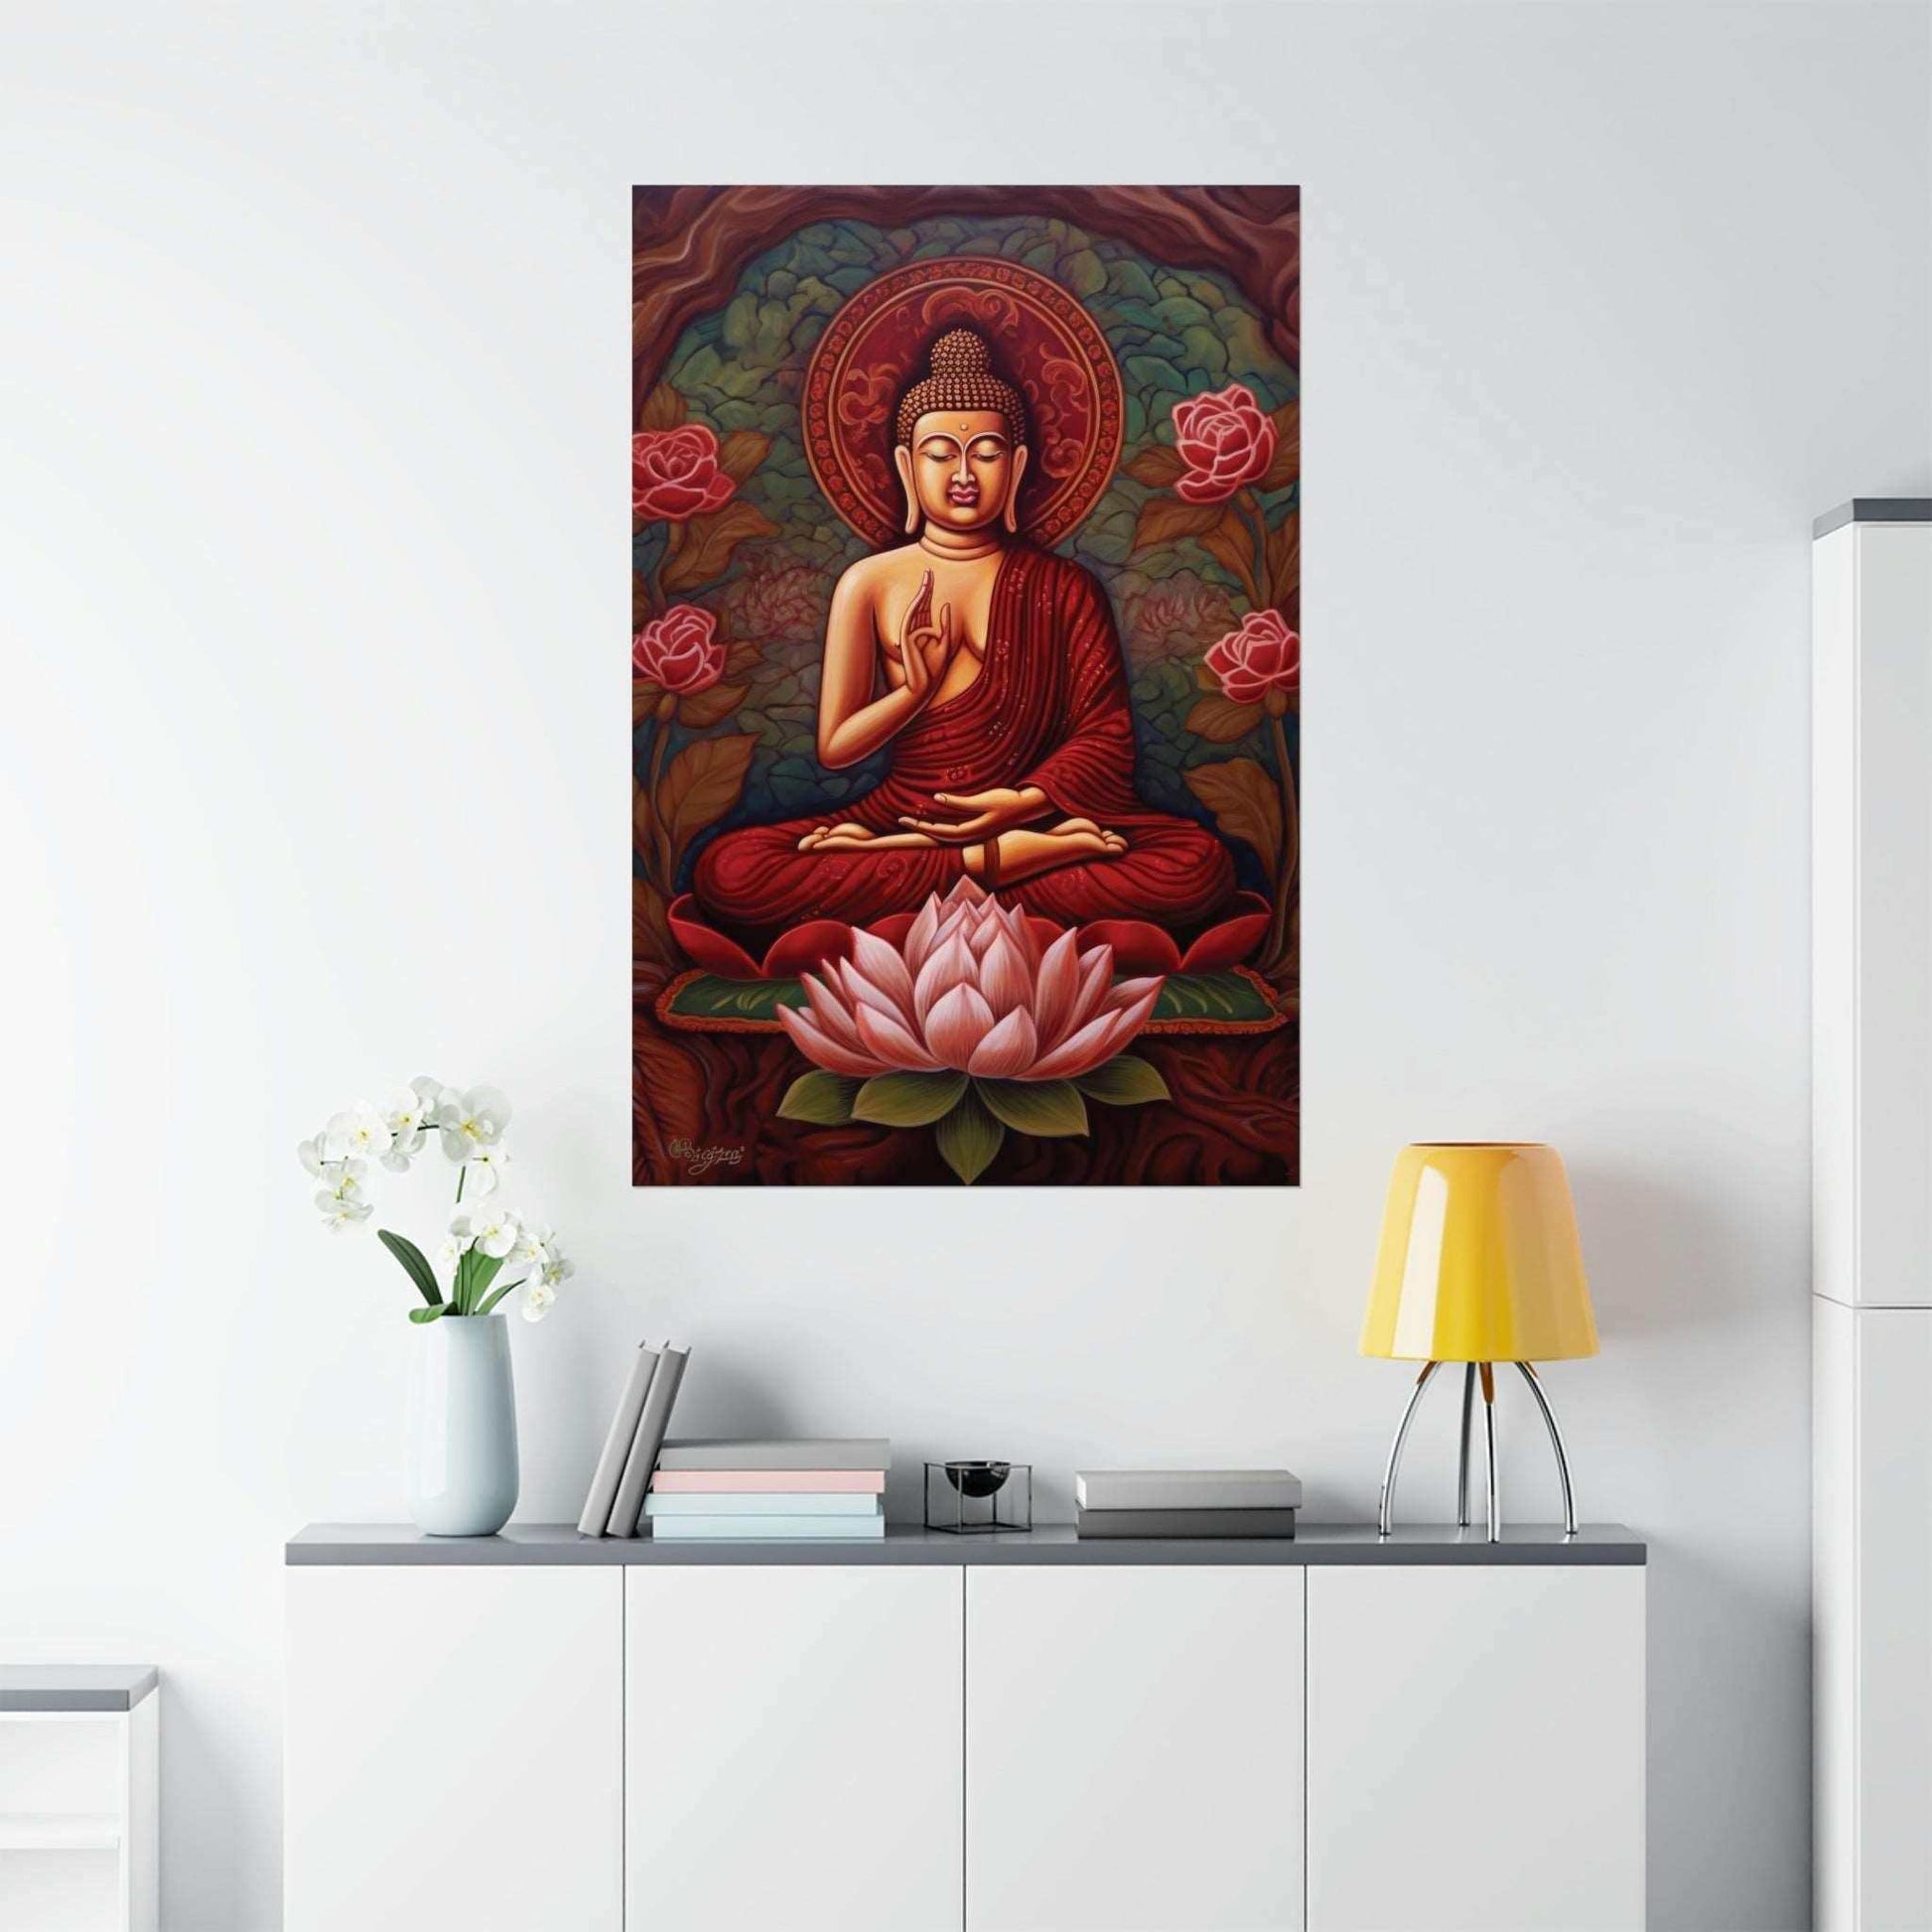 ZenArtBliss.com's sitting buddha print with a lotus flower, capturing the essence of Buddha in rich red and pink tones on matte paper.